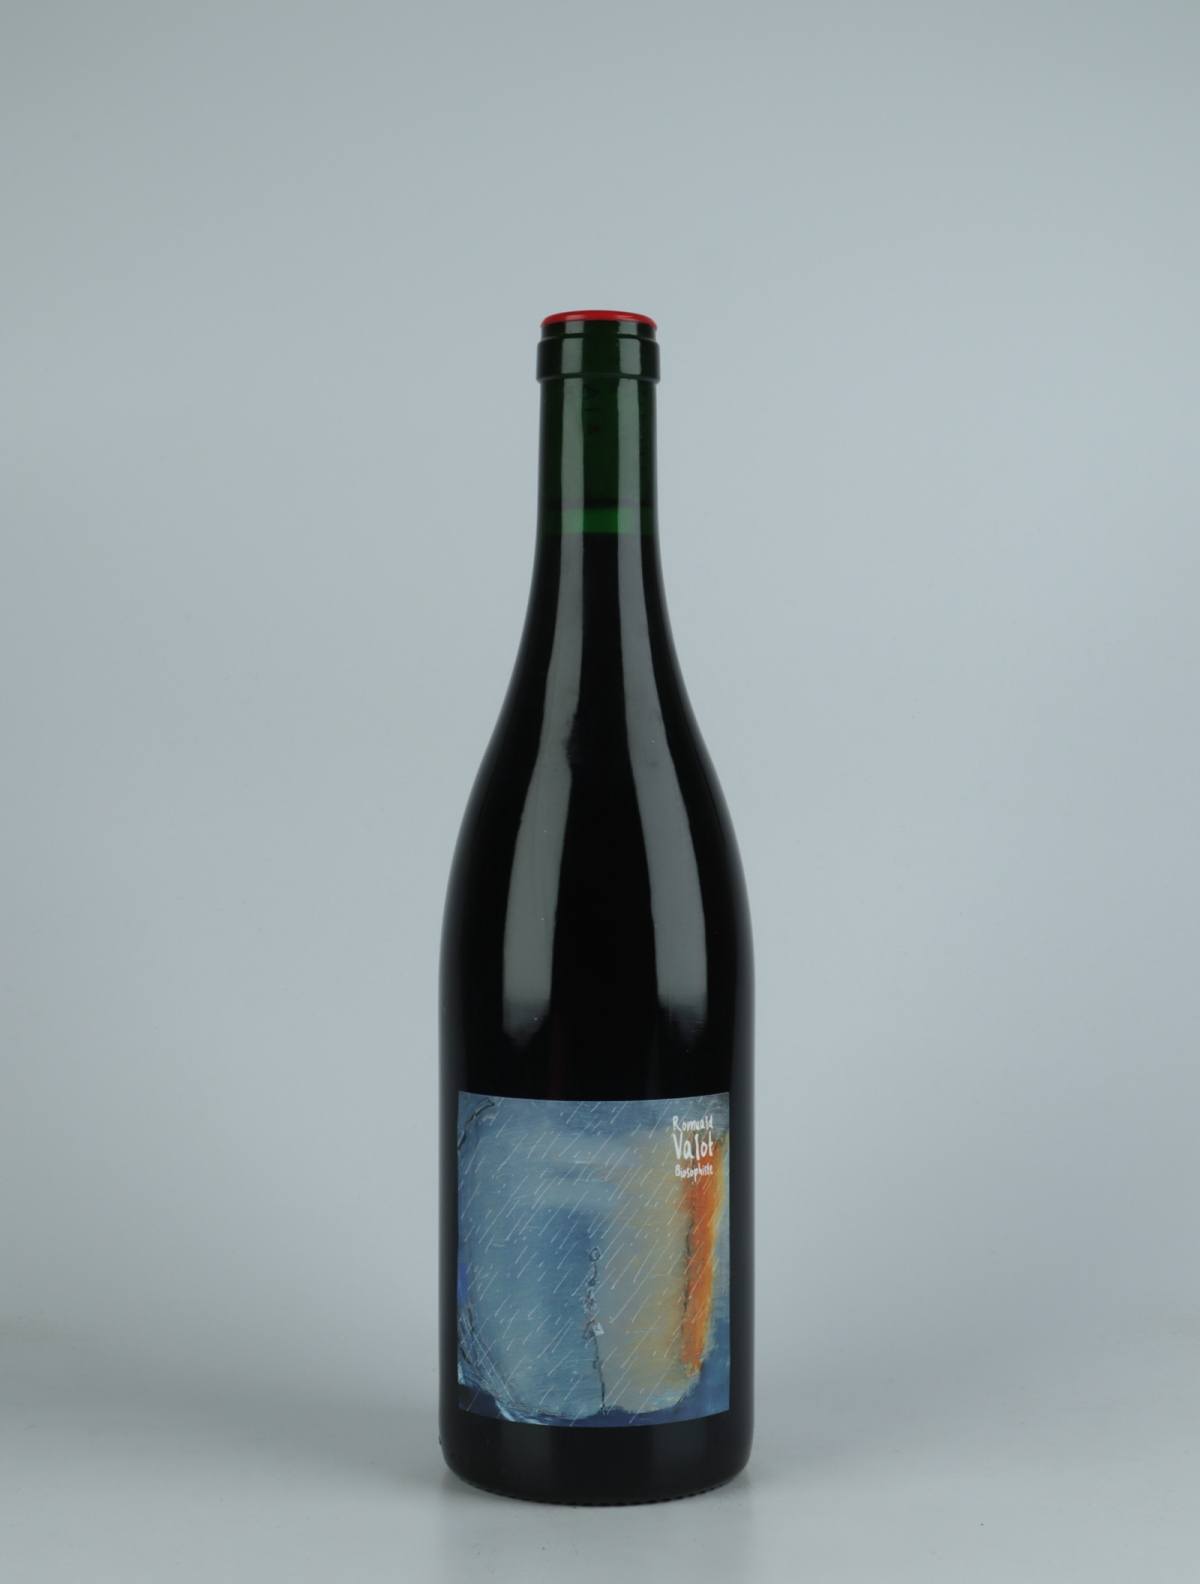 A bottle 2021 Temps de Chien Red wine from Romuald Valot, Beaujolais in France